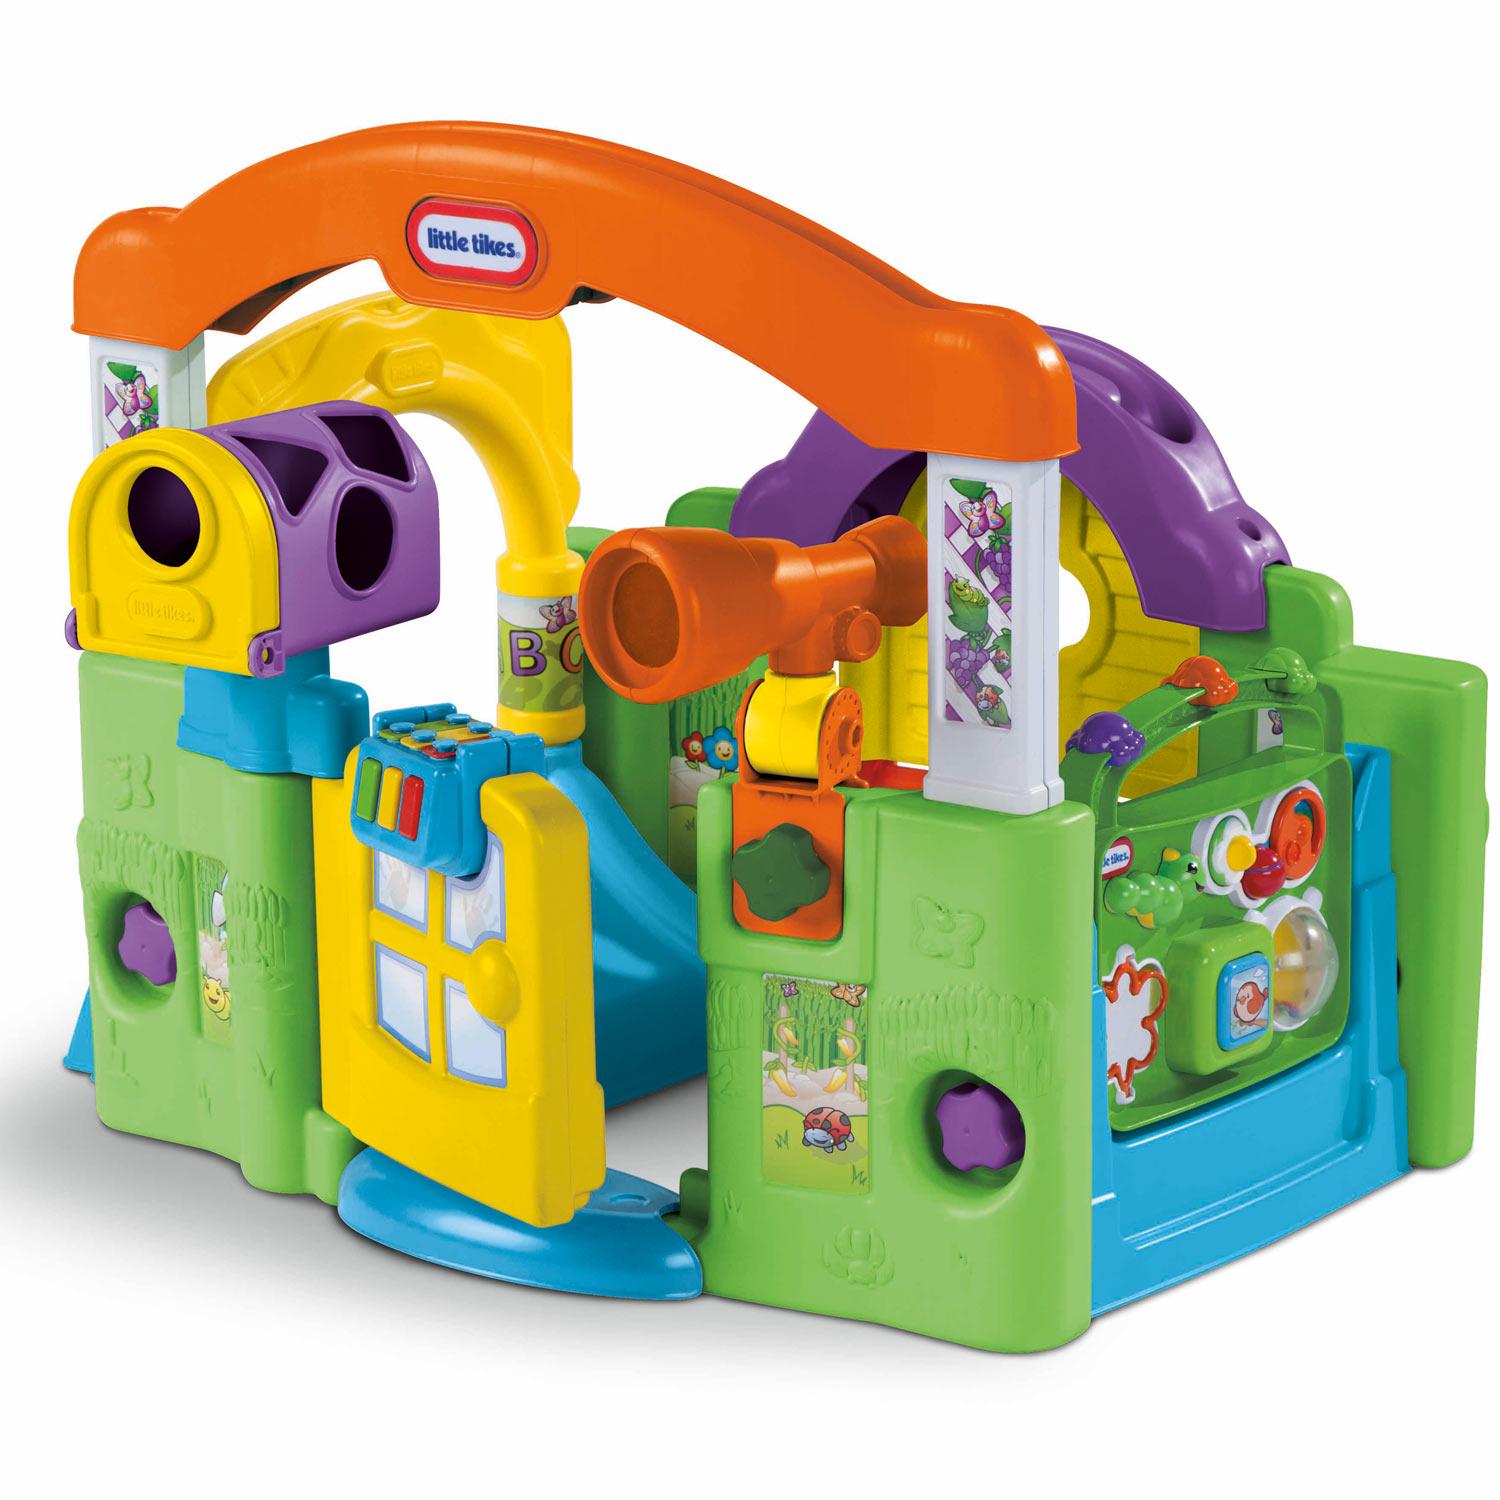 Image of Little Tikes Activity Garden Baby Playset - Recommended by Child Behavior Clinic